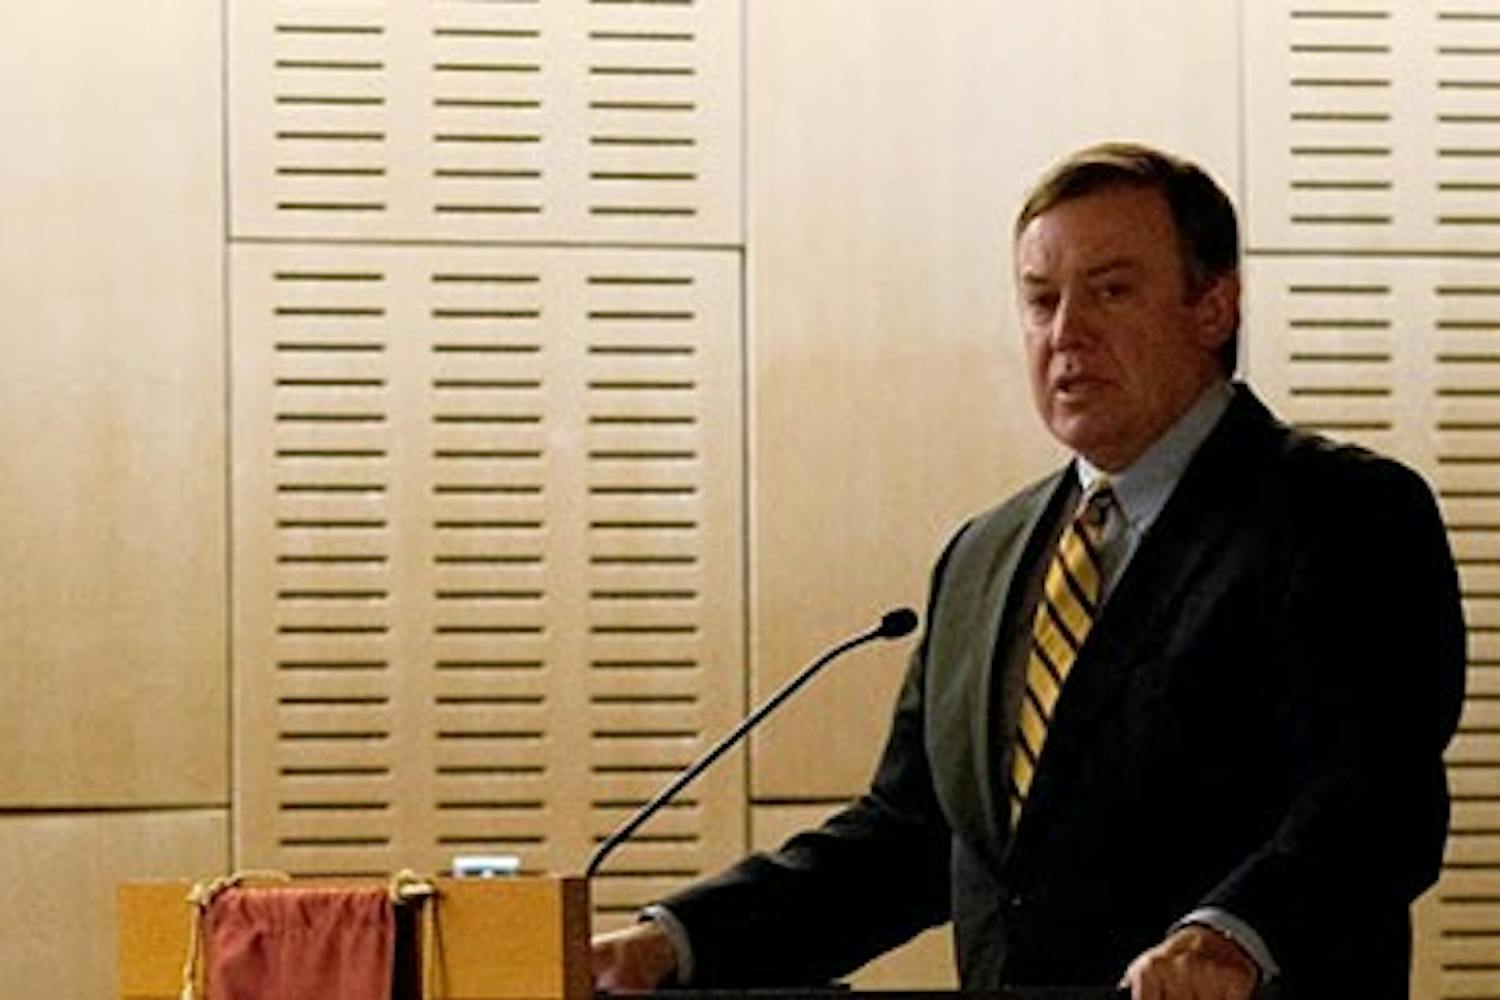 ASU President Michael Crow told a room full of community members Wednesday night at the Tempe campus that ASU's involvement within the community would be facilitated through three major areas: individuals, institutions and technology.

The event, organized by Changemaker Central, focused on how individuals within the ASU community are able to directly and indirectly invoke change through various University resources. (Photo by Diana Lustig)